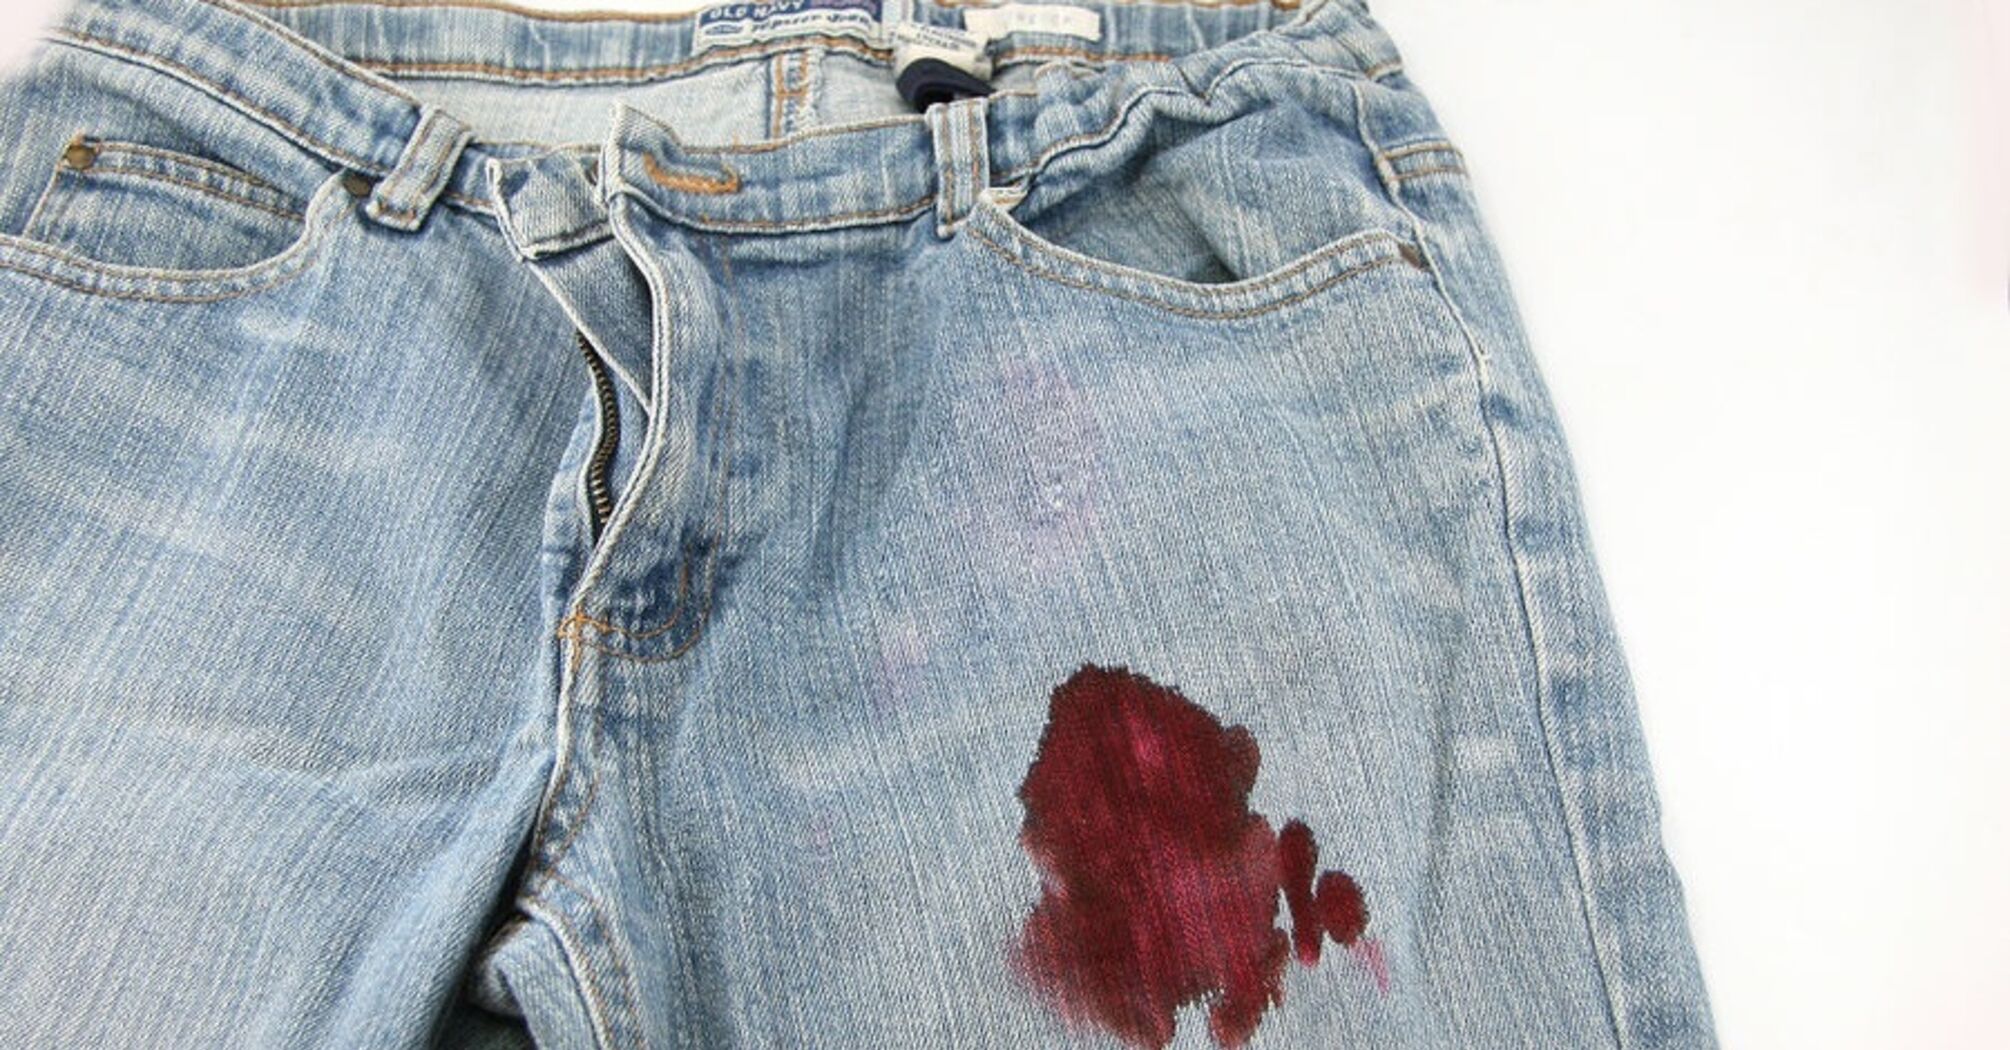 Blood stains on clothes - how to get rid of them